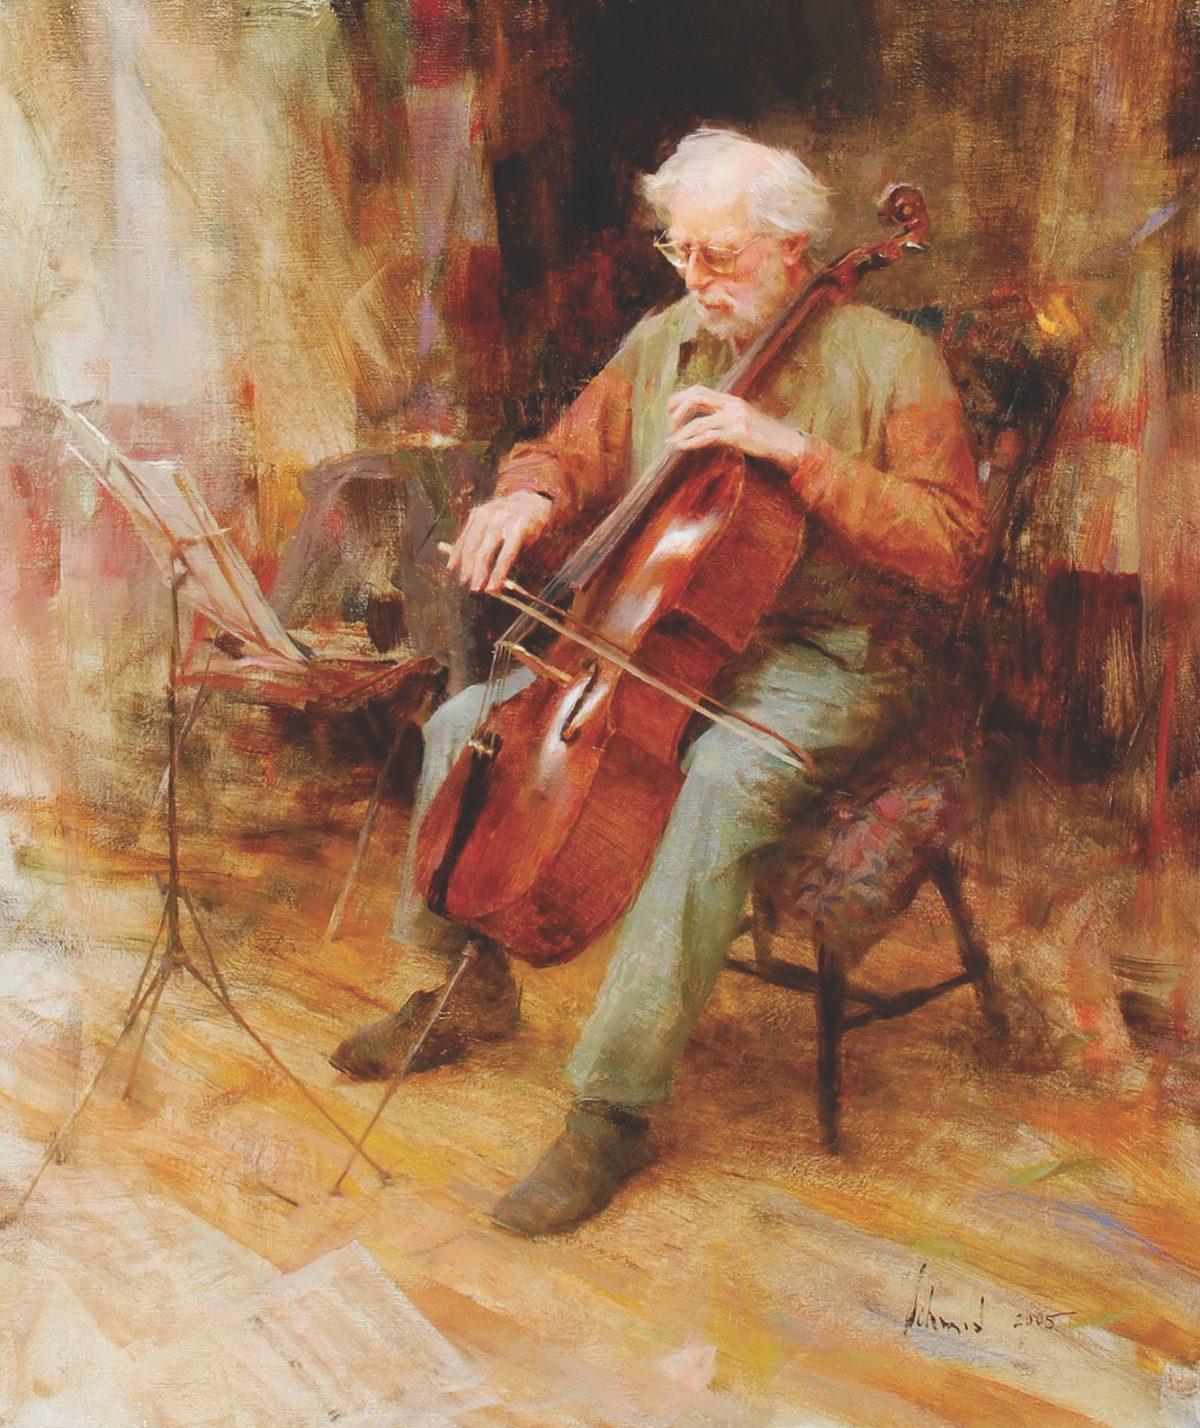 "David Wells, Cellist," 2005, by Richard Schmid. Oil on canvas, 26 inches by 22 inches. (Courtesy of Tim Newton)